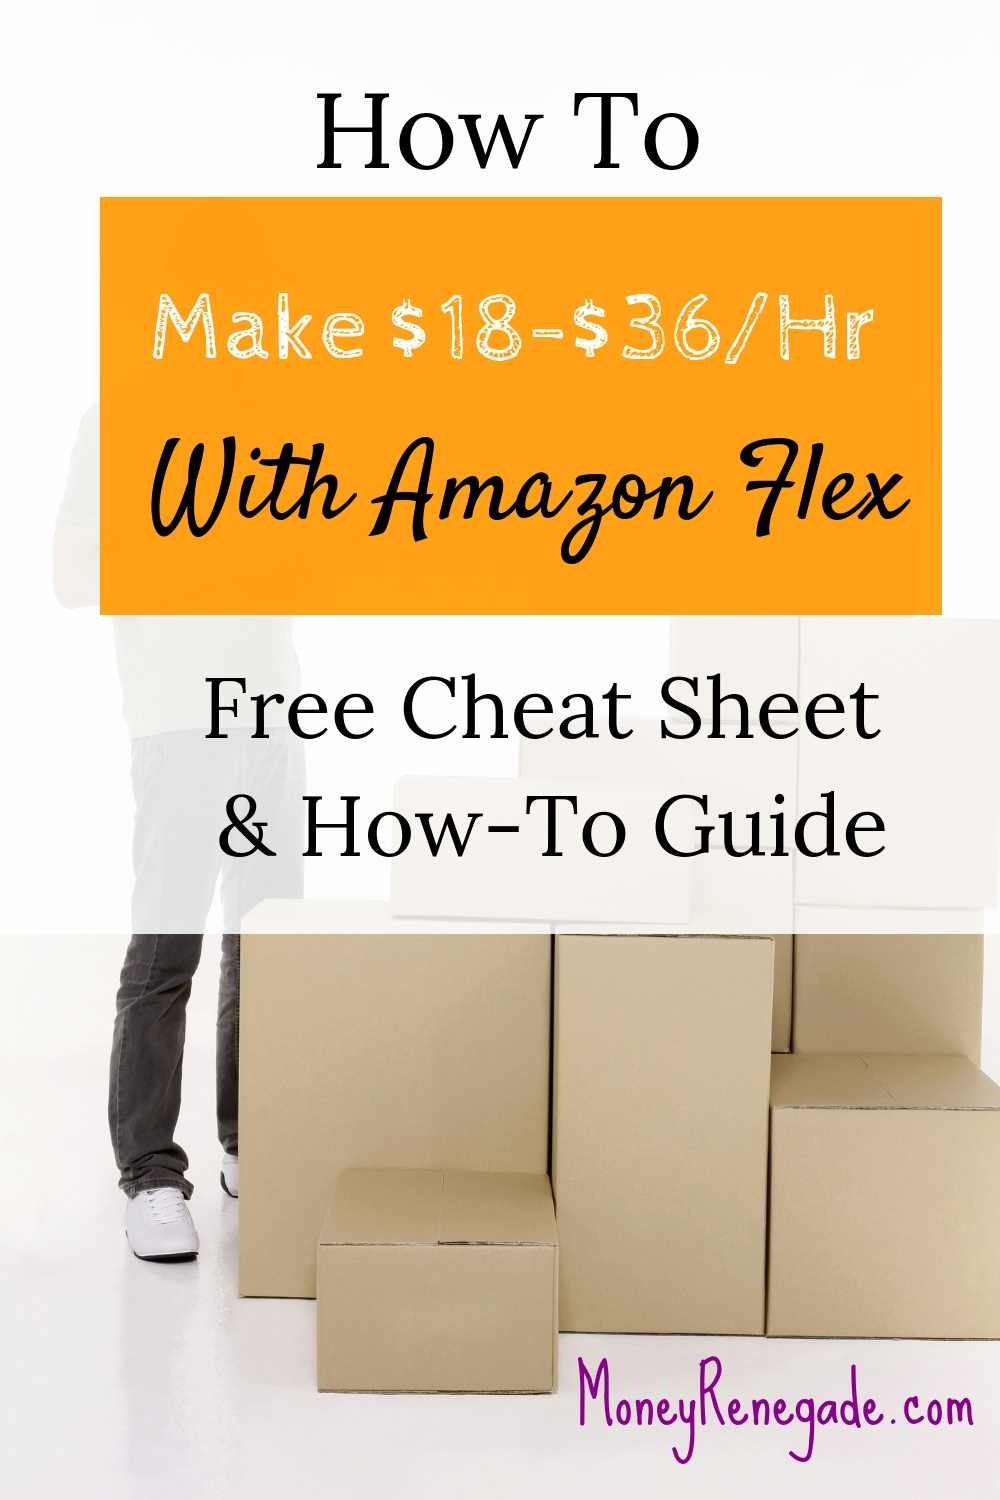 Definitive How To Make $18-$36/Hr With Amazon Flex